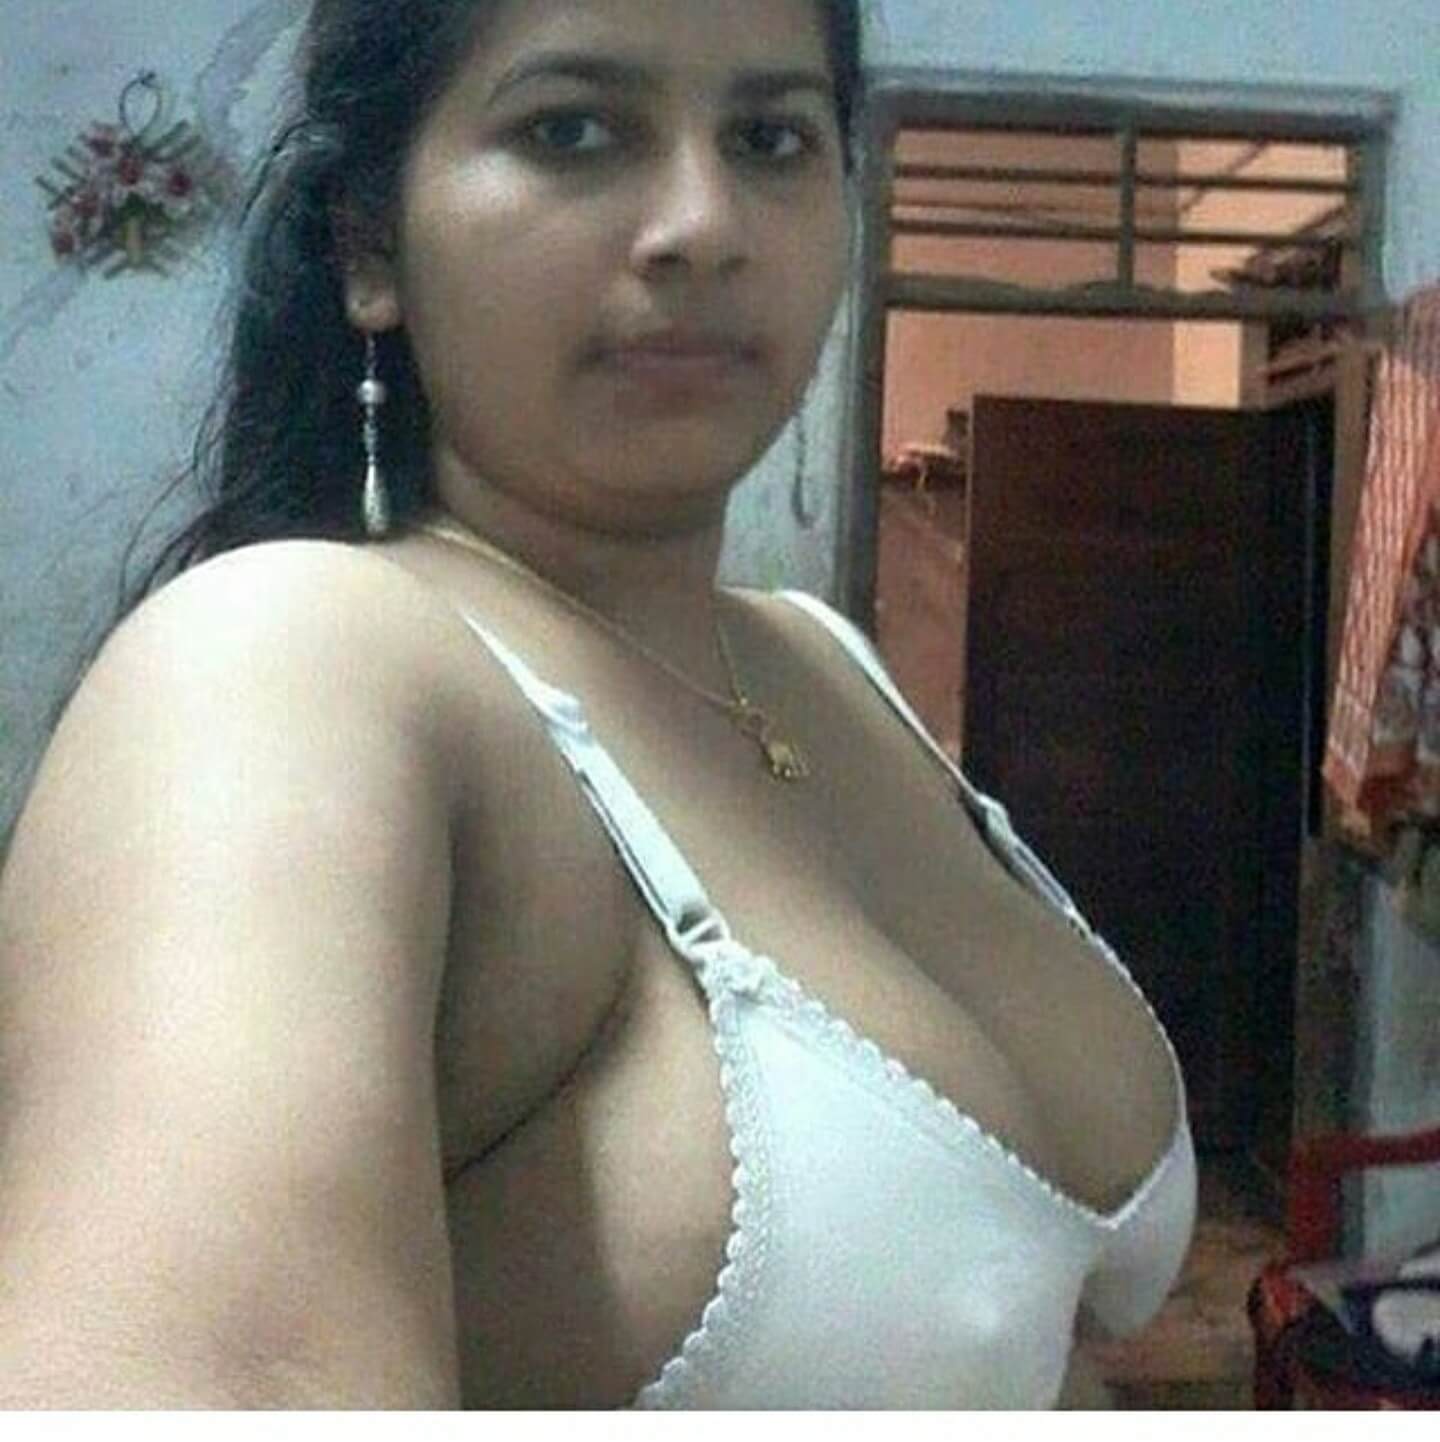 Bangladesi call girls big ass and pussy nude pic pic